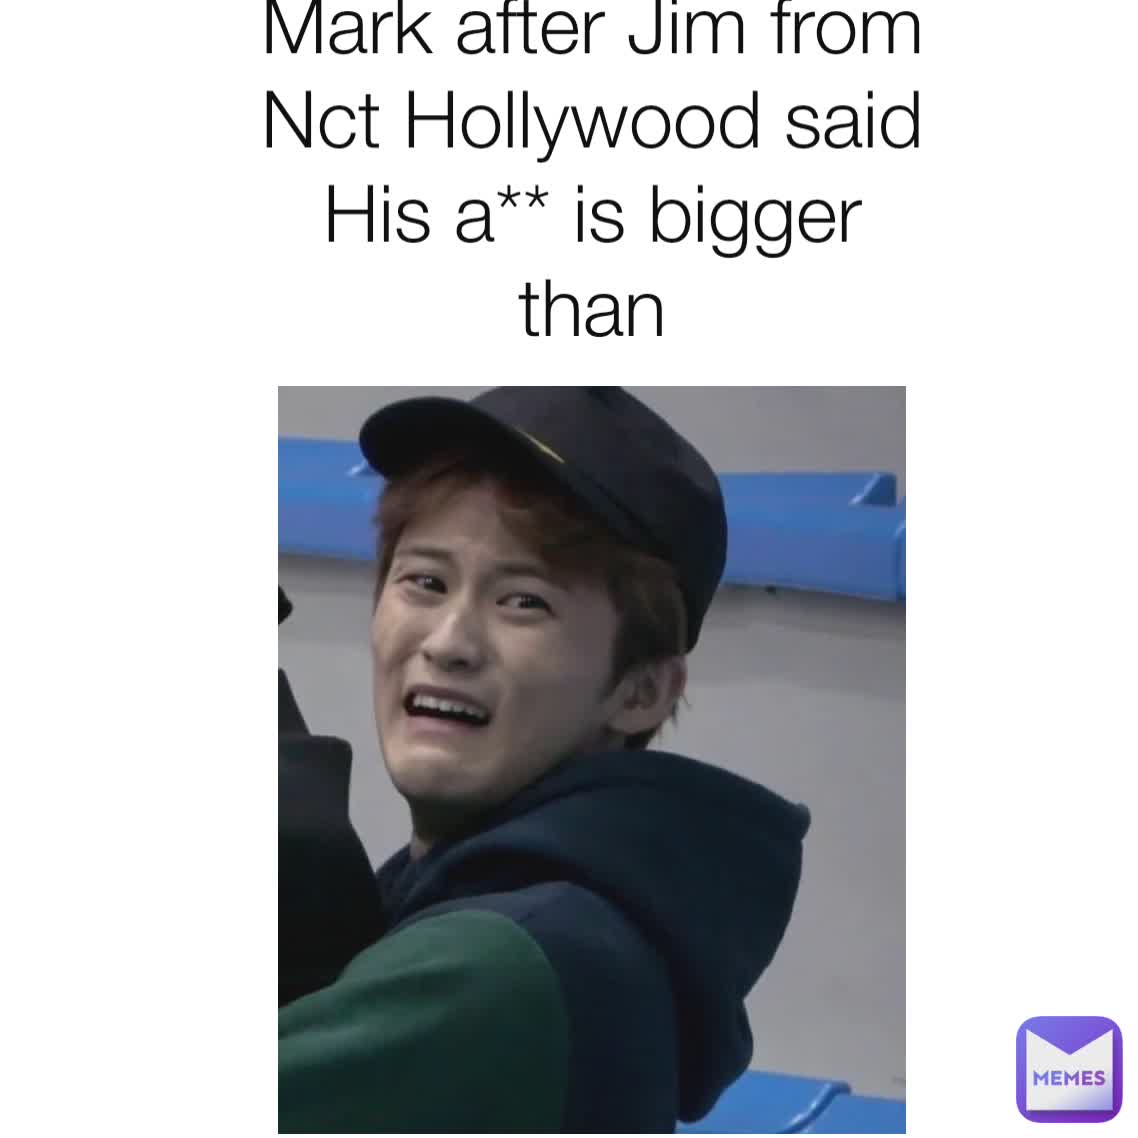 Mark after Jim from
Nct Hollywood said
His a** is bigger than
Mark